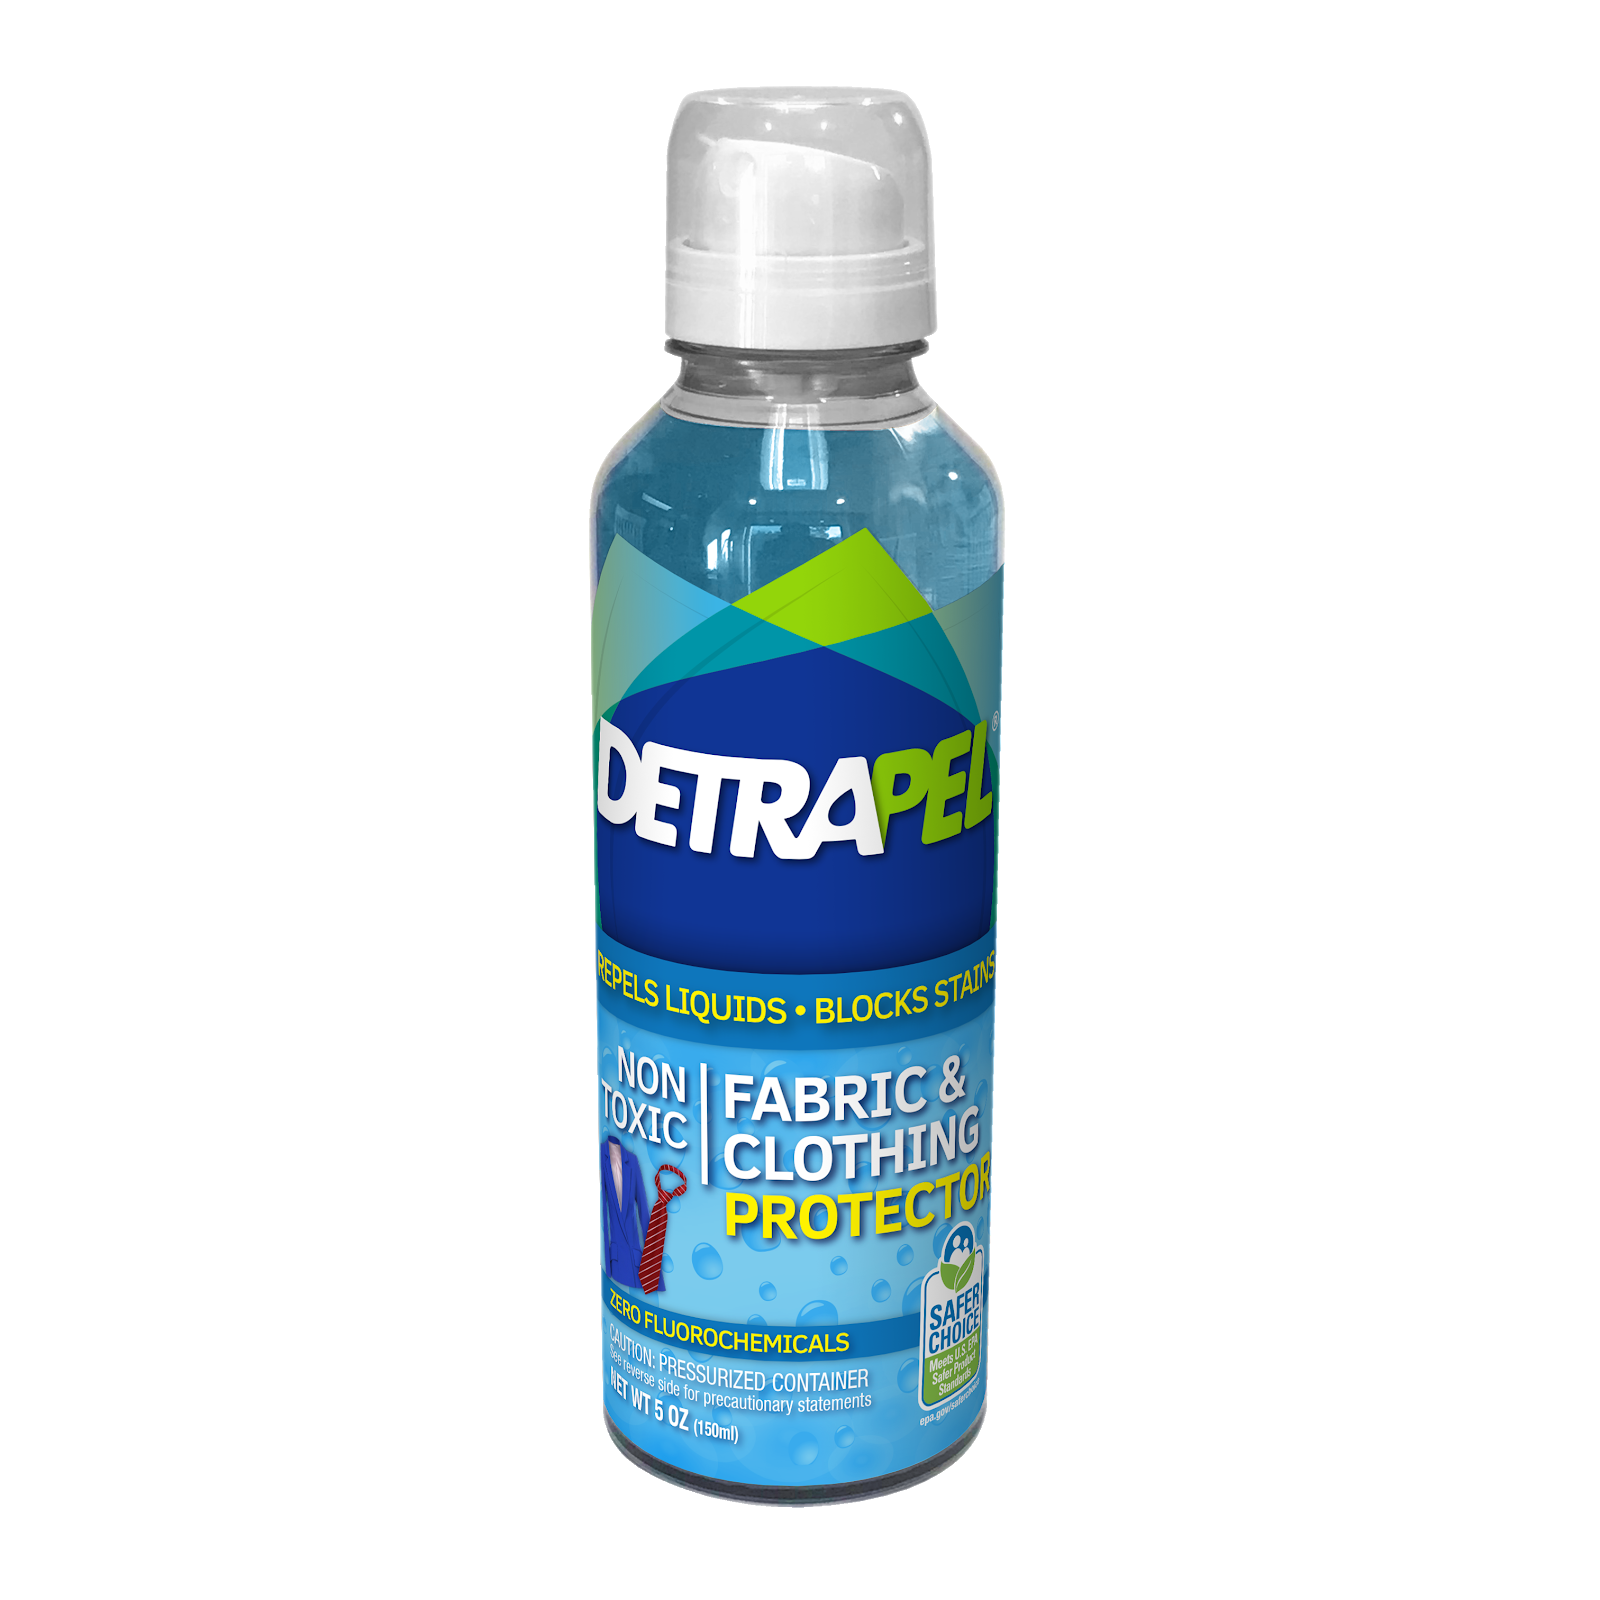 detrapel-a-stain-preventor-product-that-got-on-shark-tank